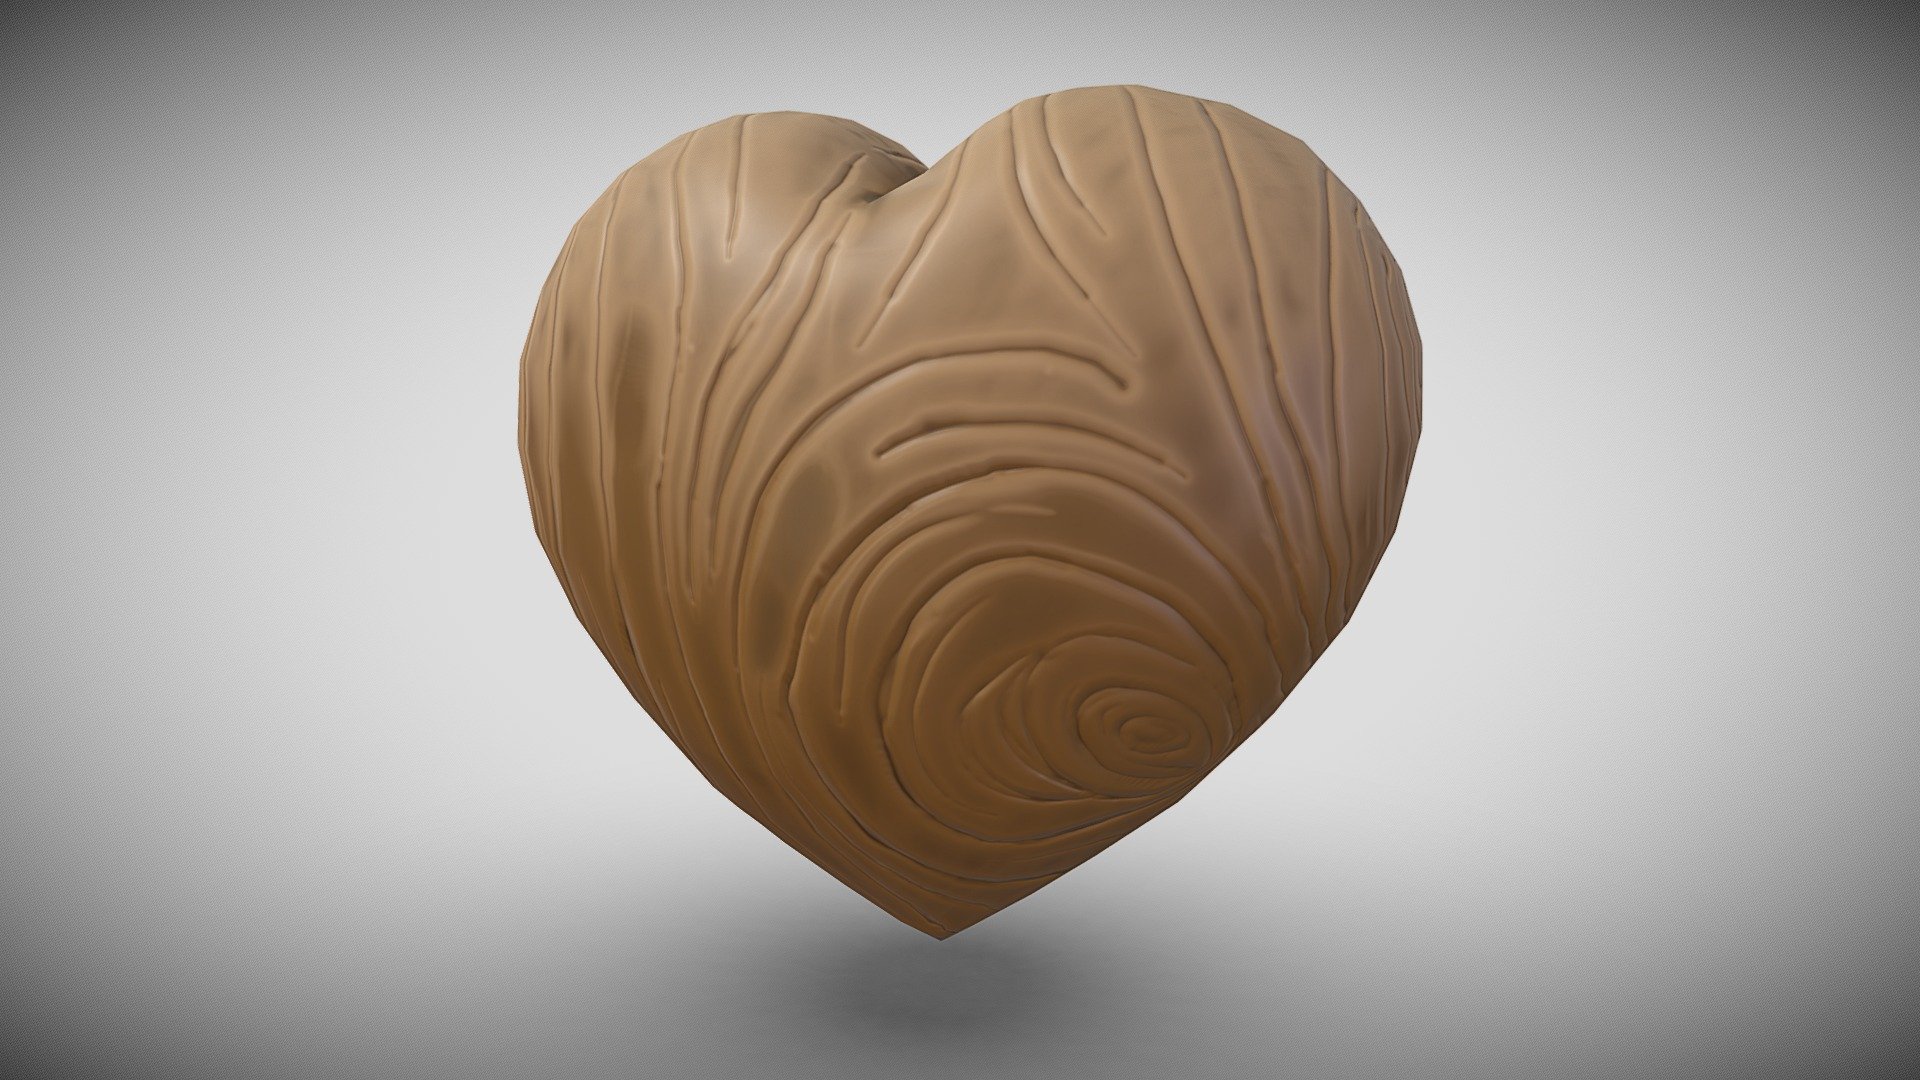 If you need additional work done do not hesitate to contact me, I am currently available for freelance work.

Wooden heart sculpture that could be found on a pedestal in the woods /  forest, at a woodcarver or lumberjack or as a gift for the loved ones in a stylized game.
Full retopology and pbr colored.

452 Vertices

Highpoly sculpted in Nomadsculpt.

Lowpoly made in Blender

Highpoly and Lowpoly-model are in a Blend-file included in additional file with embedded materials 3d model